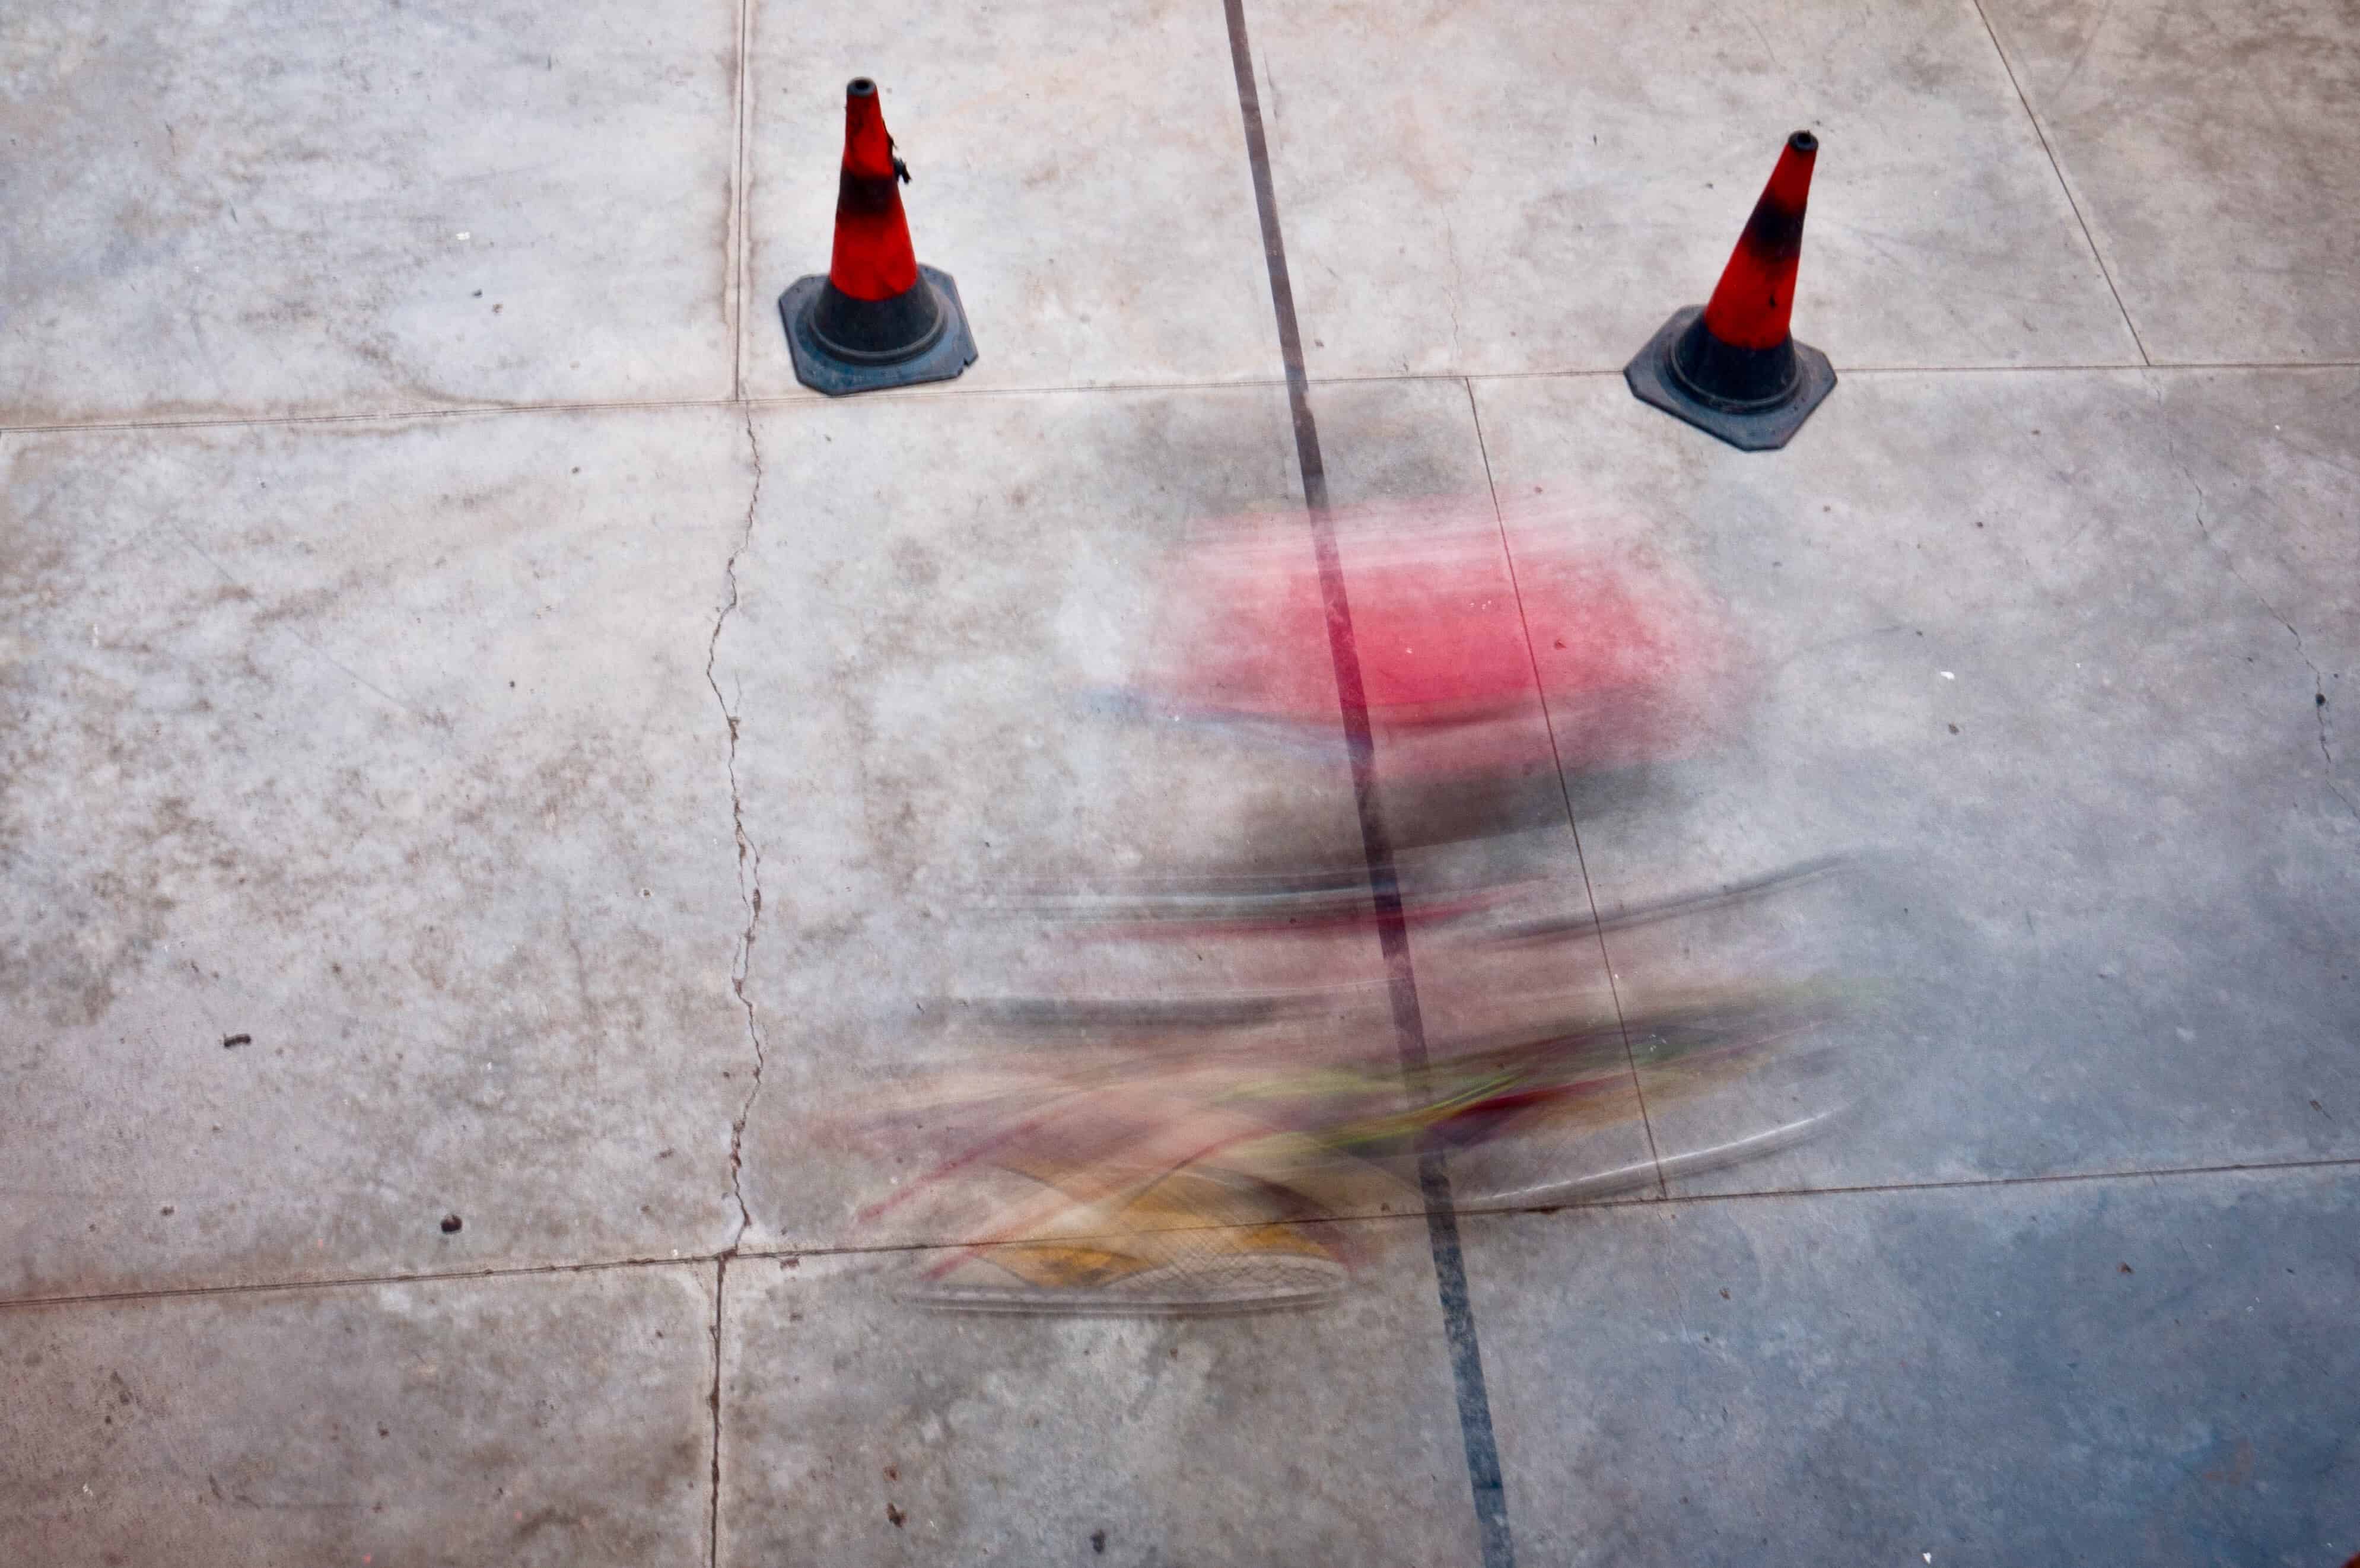 A slow shutter speed lets moving objects blur, while still elements stay sharp.